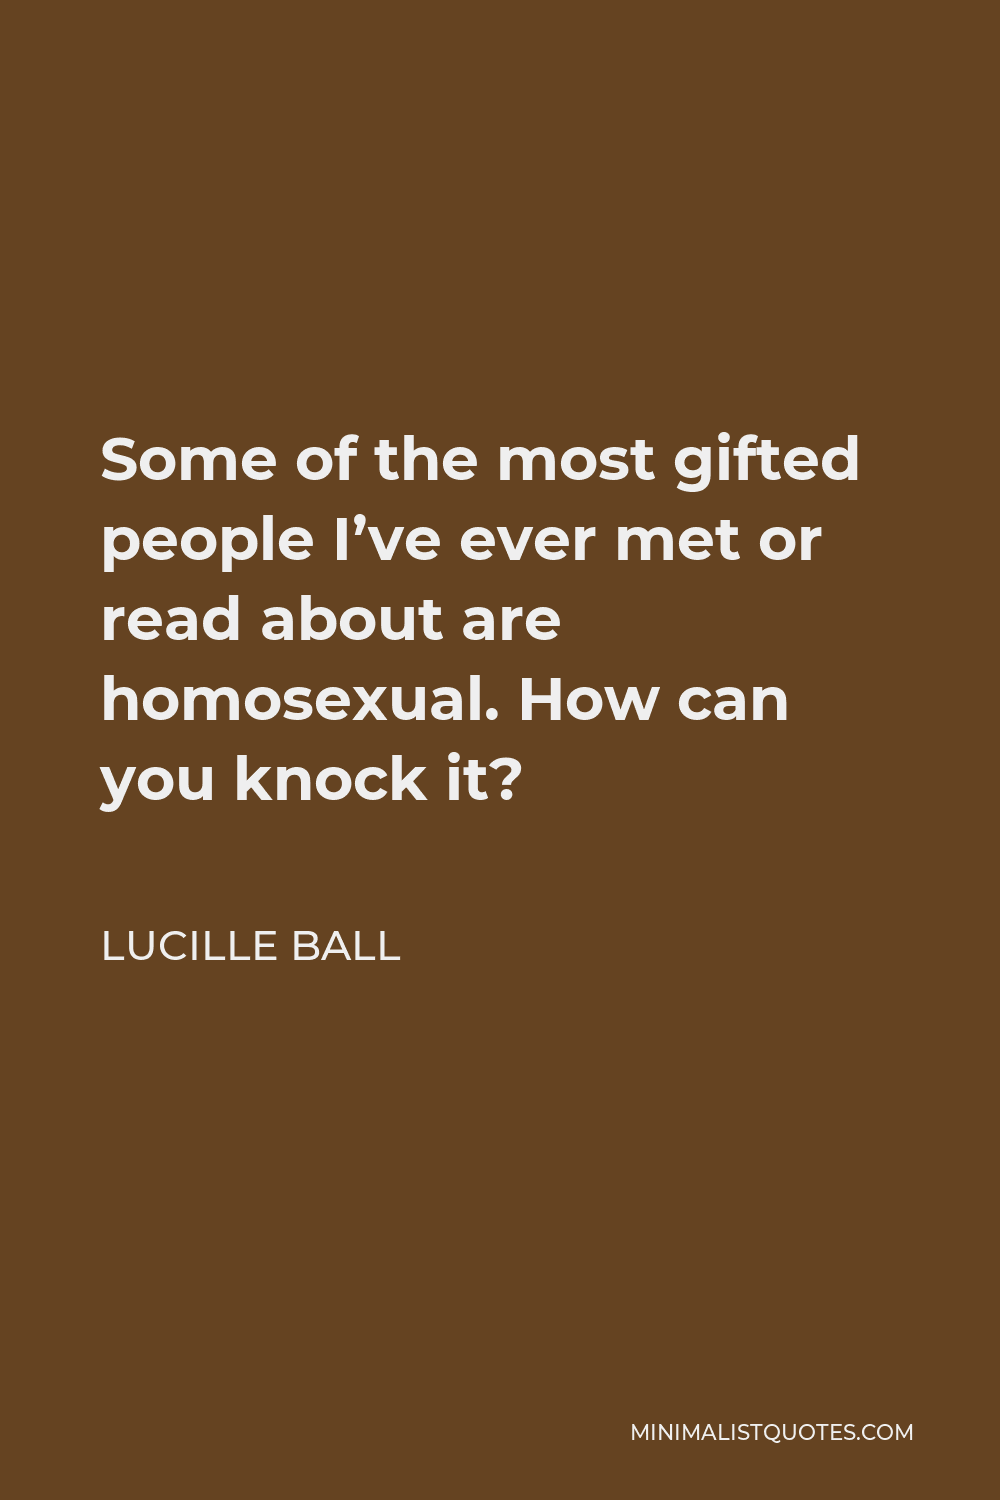 Lucille Ball Quote - Some of the most gifted people I’ve ever met or read about are homosexual. How can you knock it?